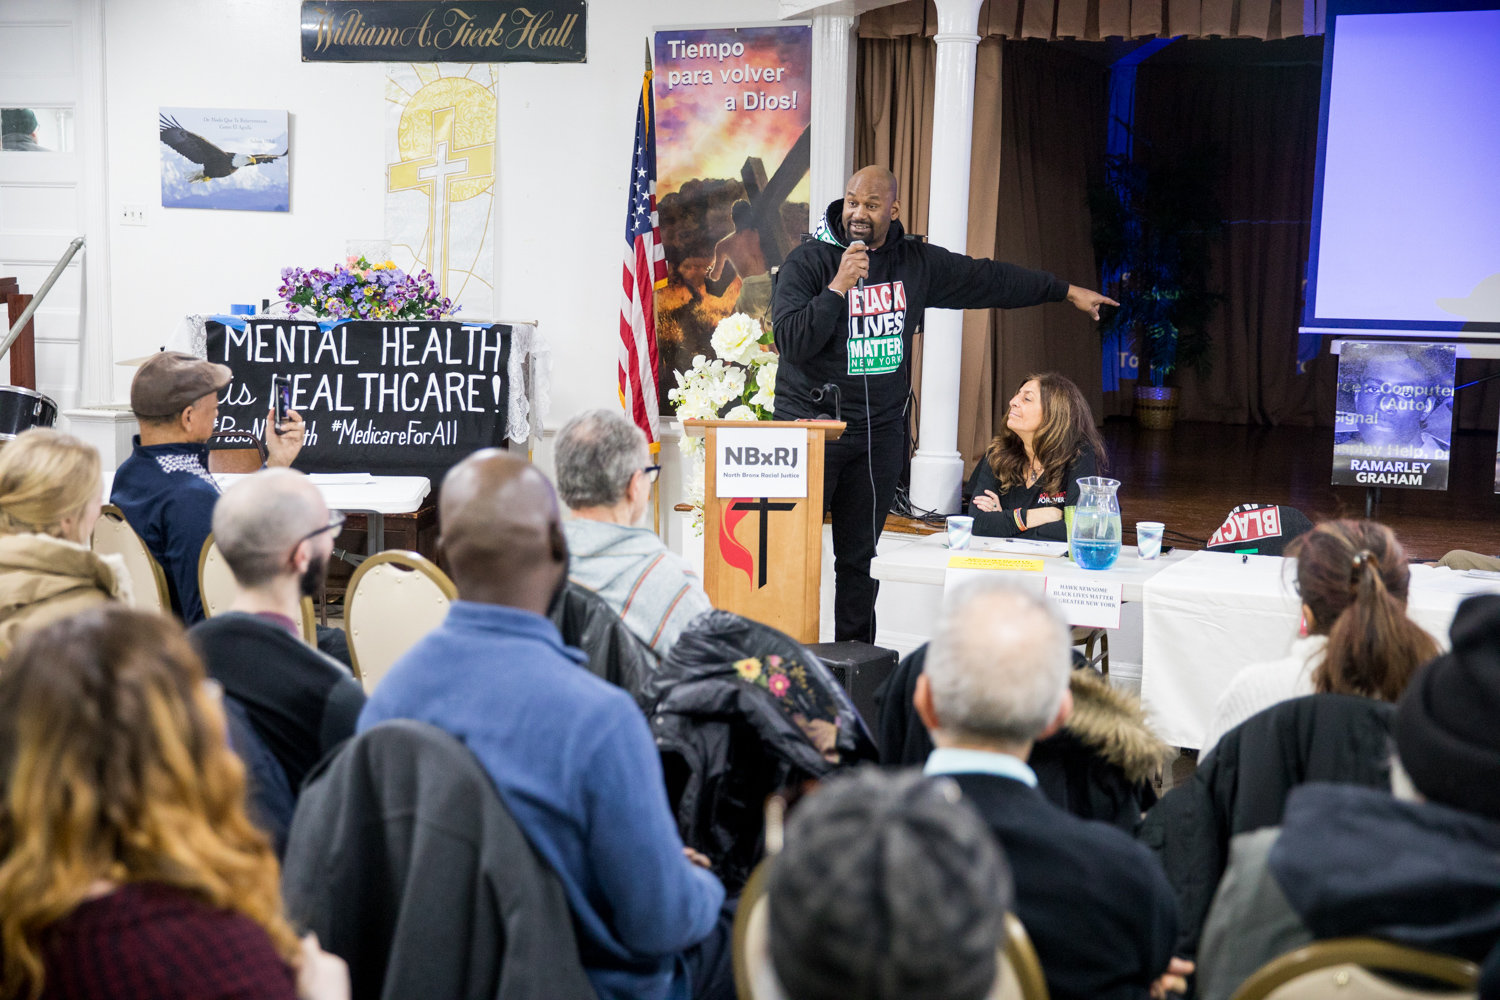 Black Lives Matter of Greater New York president Hawk Newsome speaks at a panel discussion on mental health and police activity in communities of color at St. Stephen’s United Methodist Church on Martin Luther King Jr. Day.